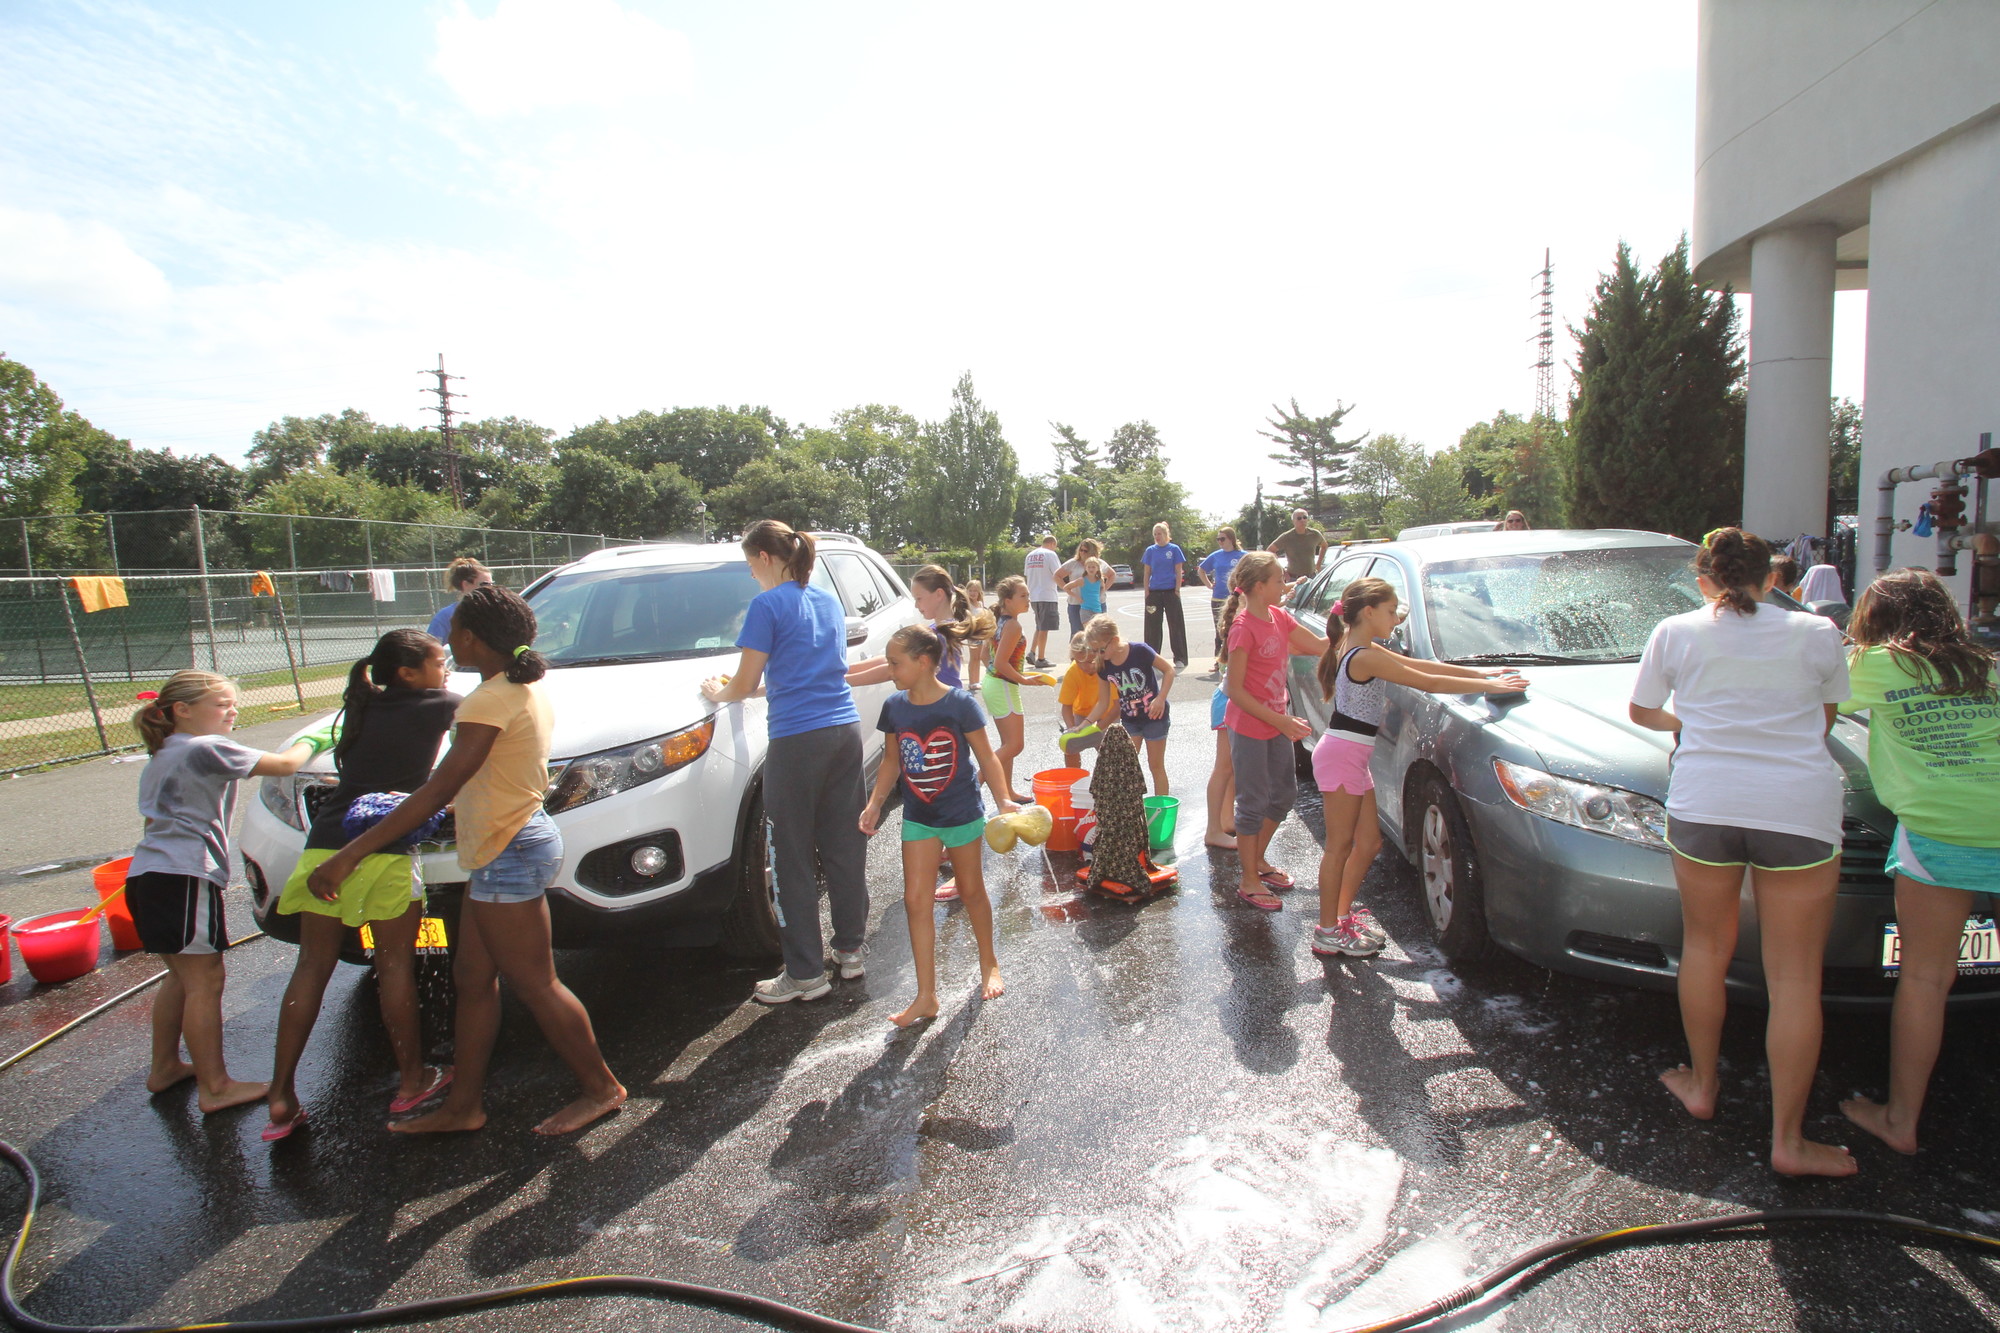 The Ultimate gymnastics team washed cars in the afternoon after their sister team, United Gymnastics, washed cars in the morning to help raise money for both their teams at the Rockville Centre Recreation center.